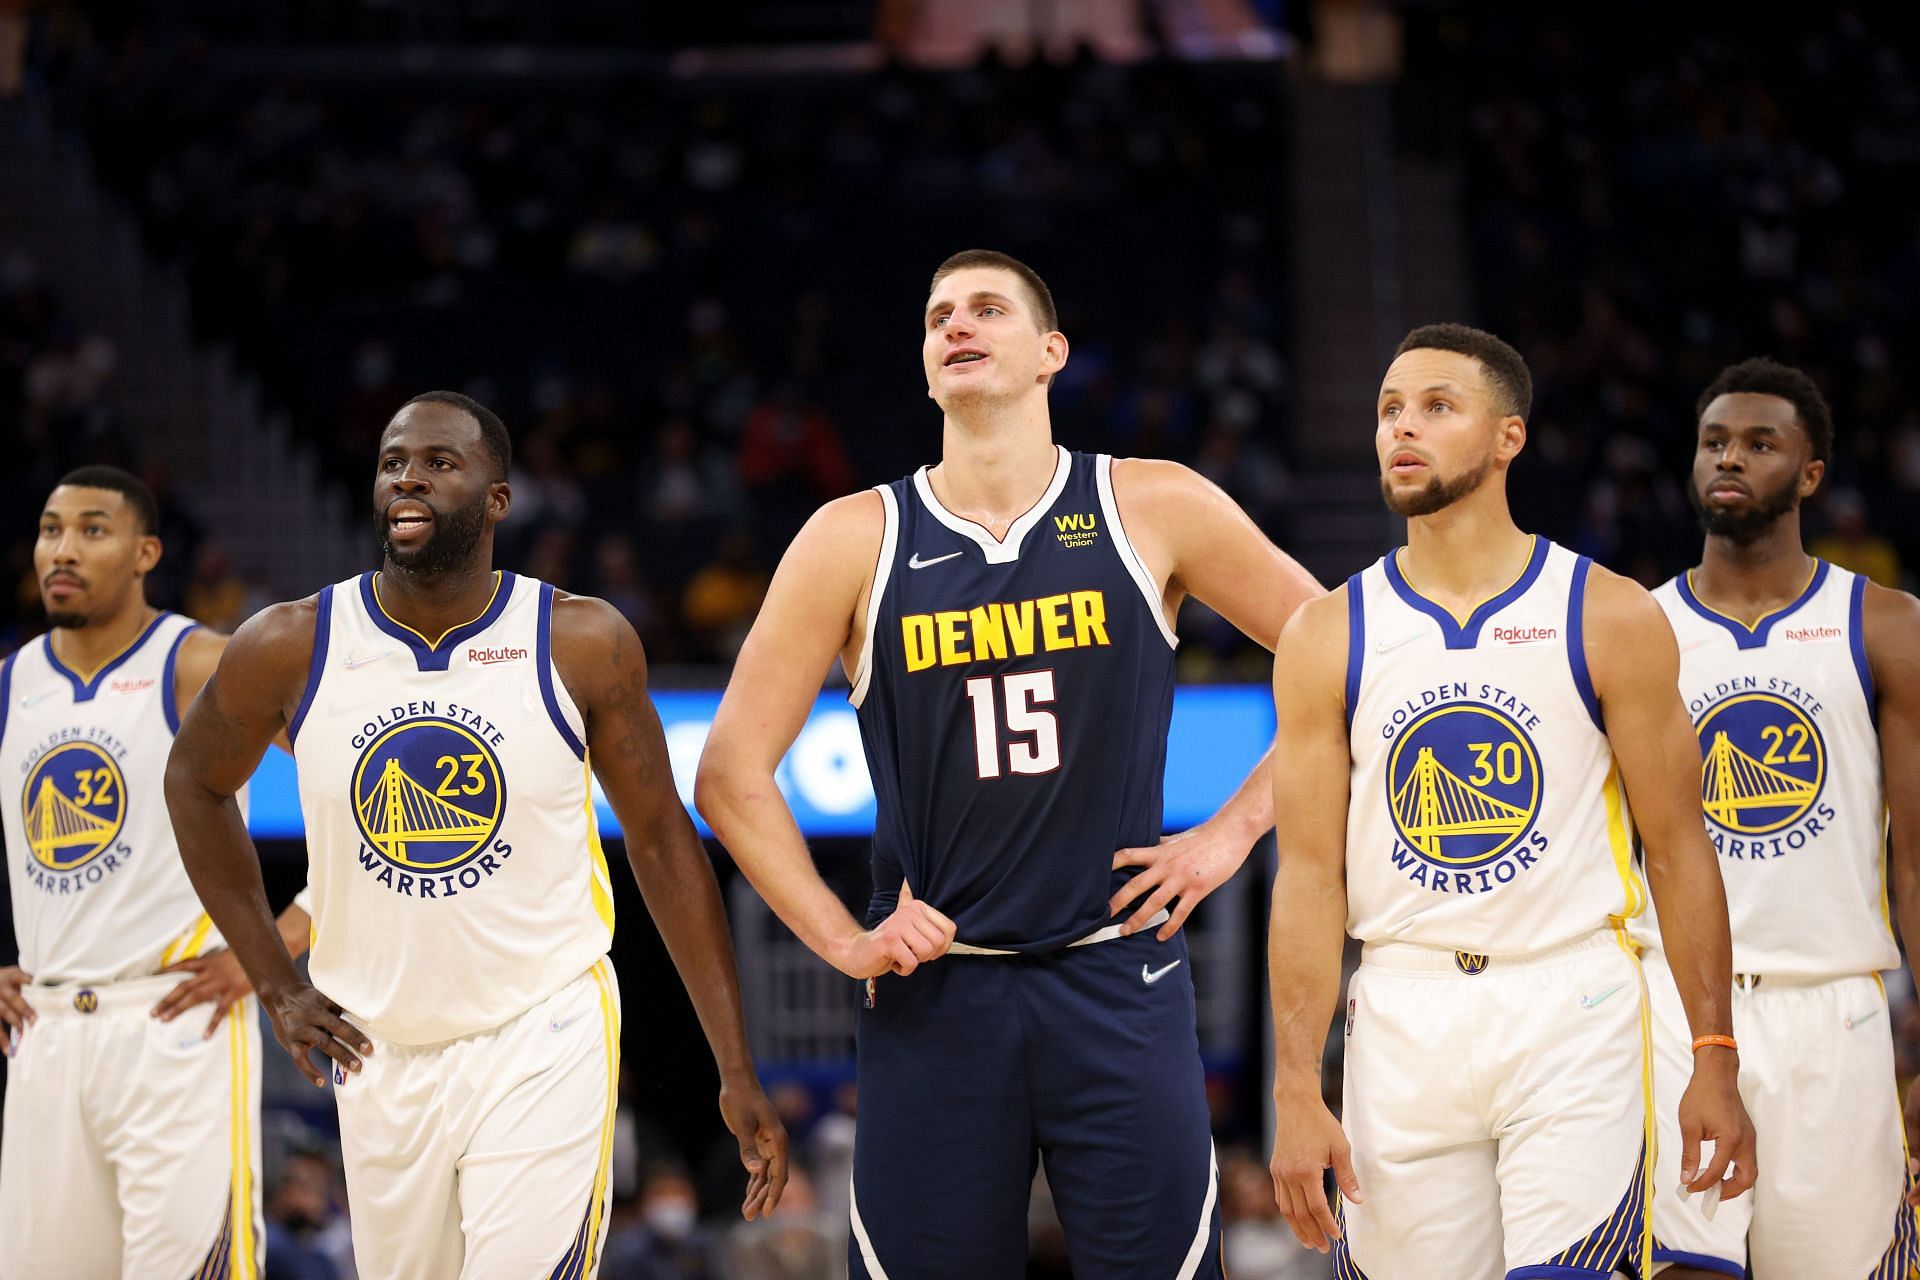 Nikola Jokic of the Denver Nuggets against Stephen Curry and the Golden State Warriors